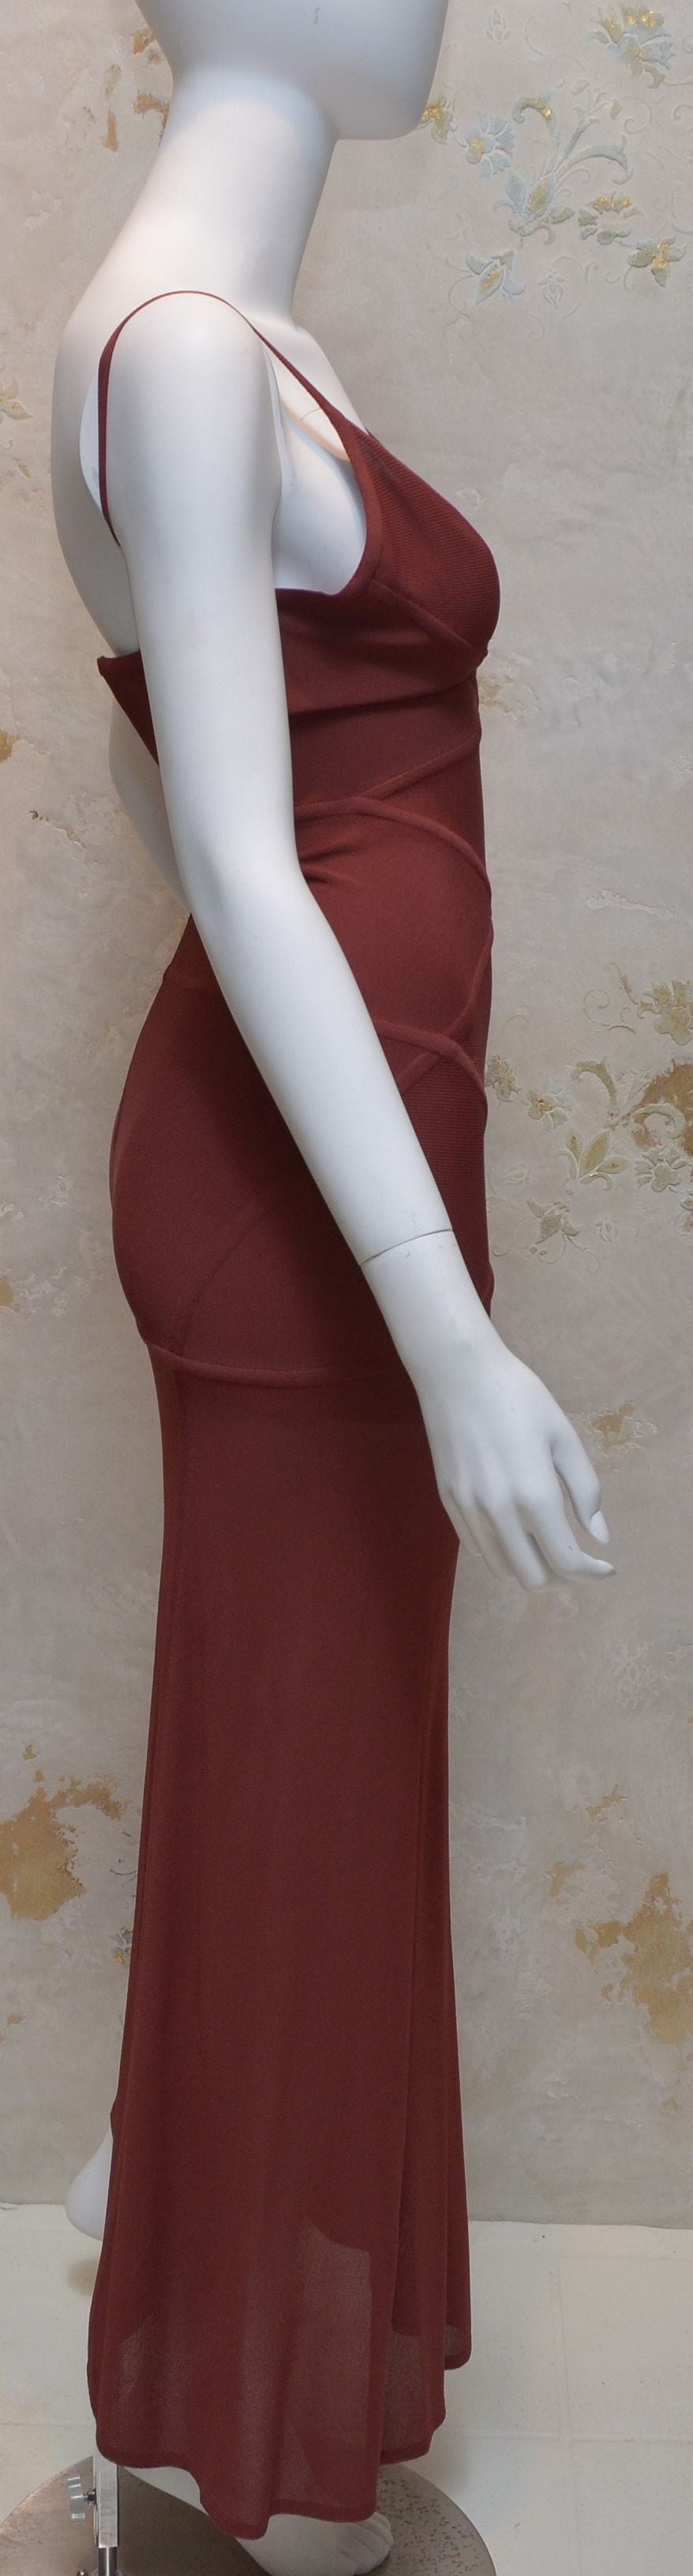 The original - pre BCBG Max Azria, Herve Leger bondage dress is made with 95% rayon and 5% lycra, and has a back zipper closure. Size S. Made in France.

Measurements: Will fit slightly larger due to stretch. Estimated size 0-2
Bust - 32''
Waist -